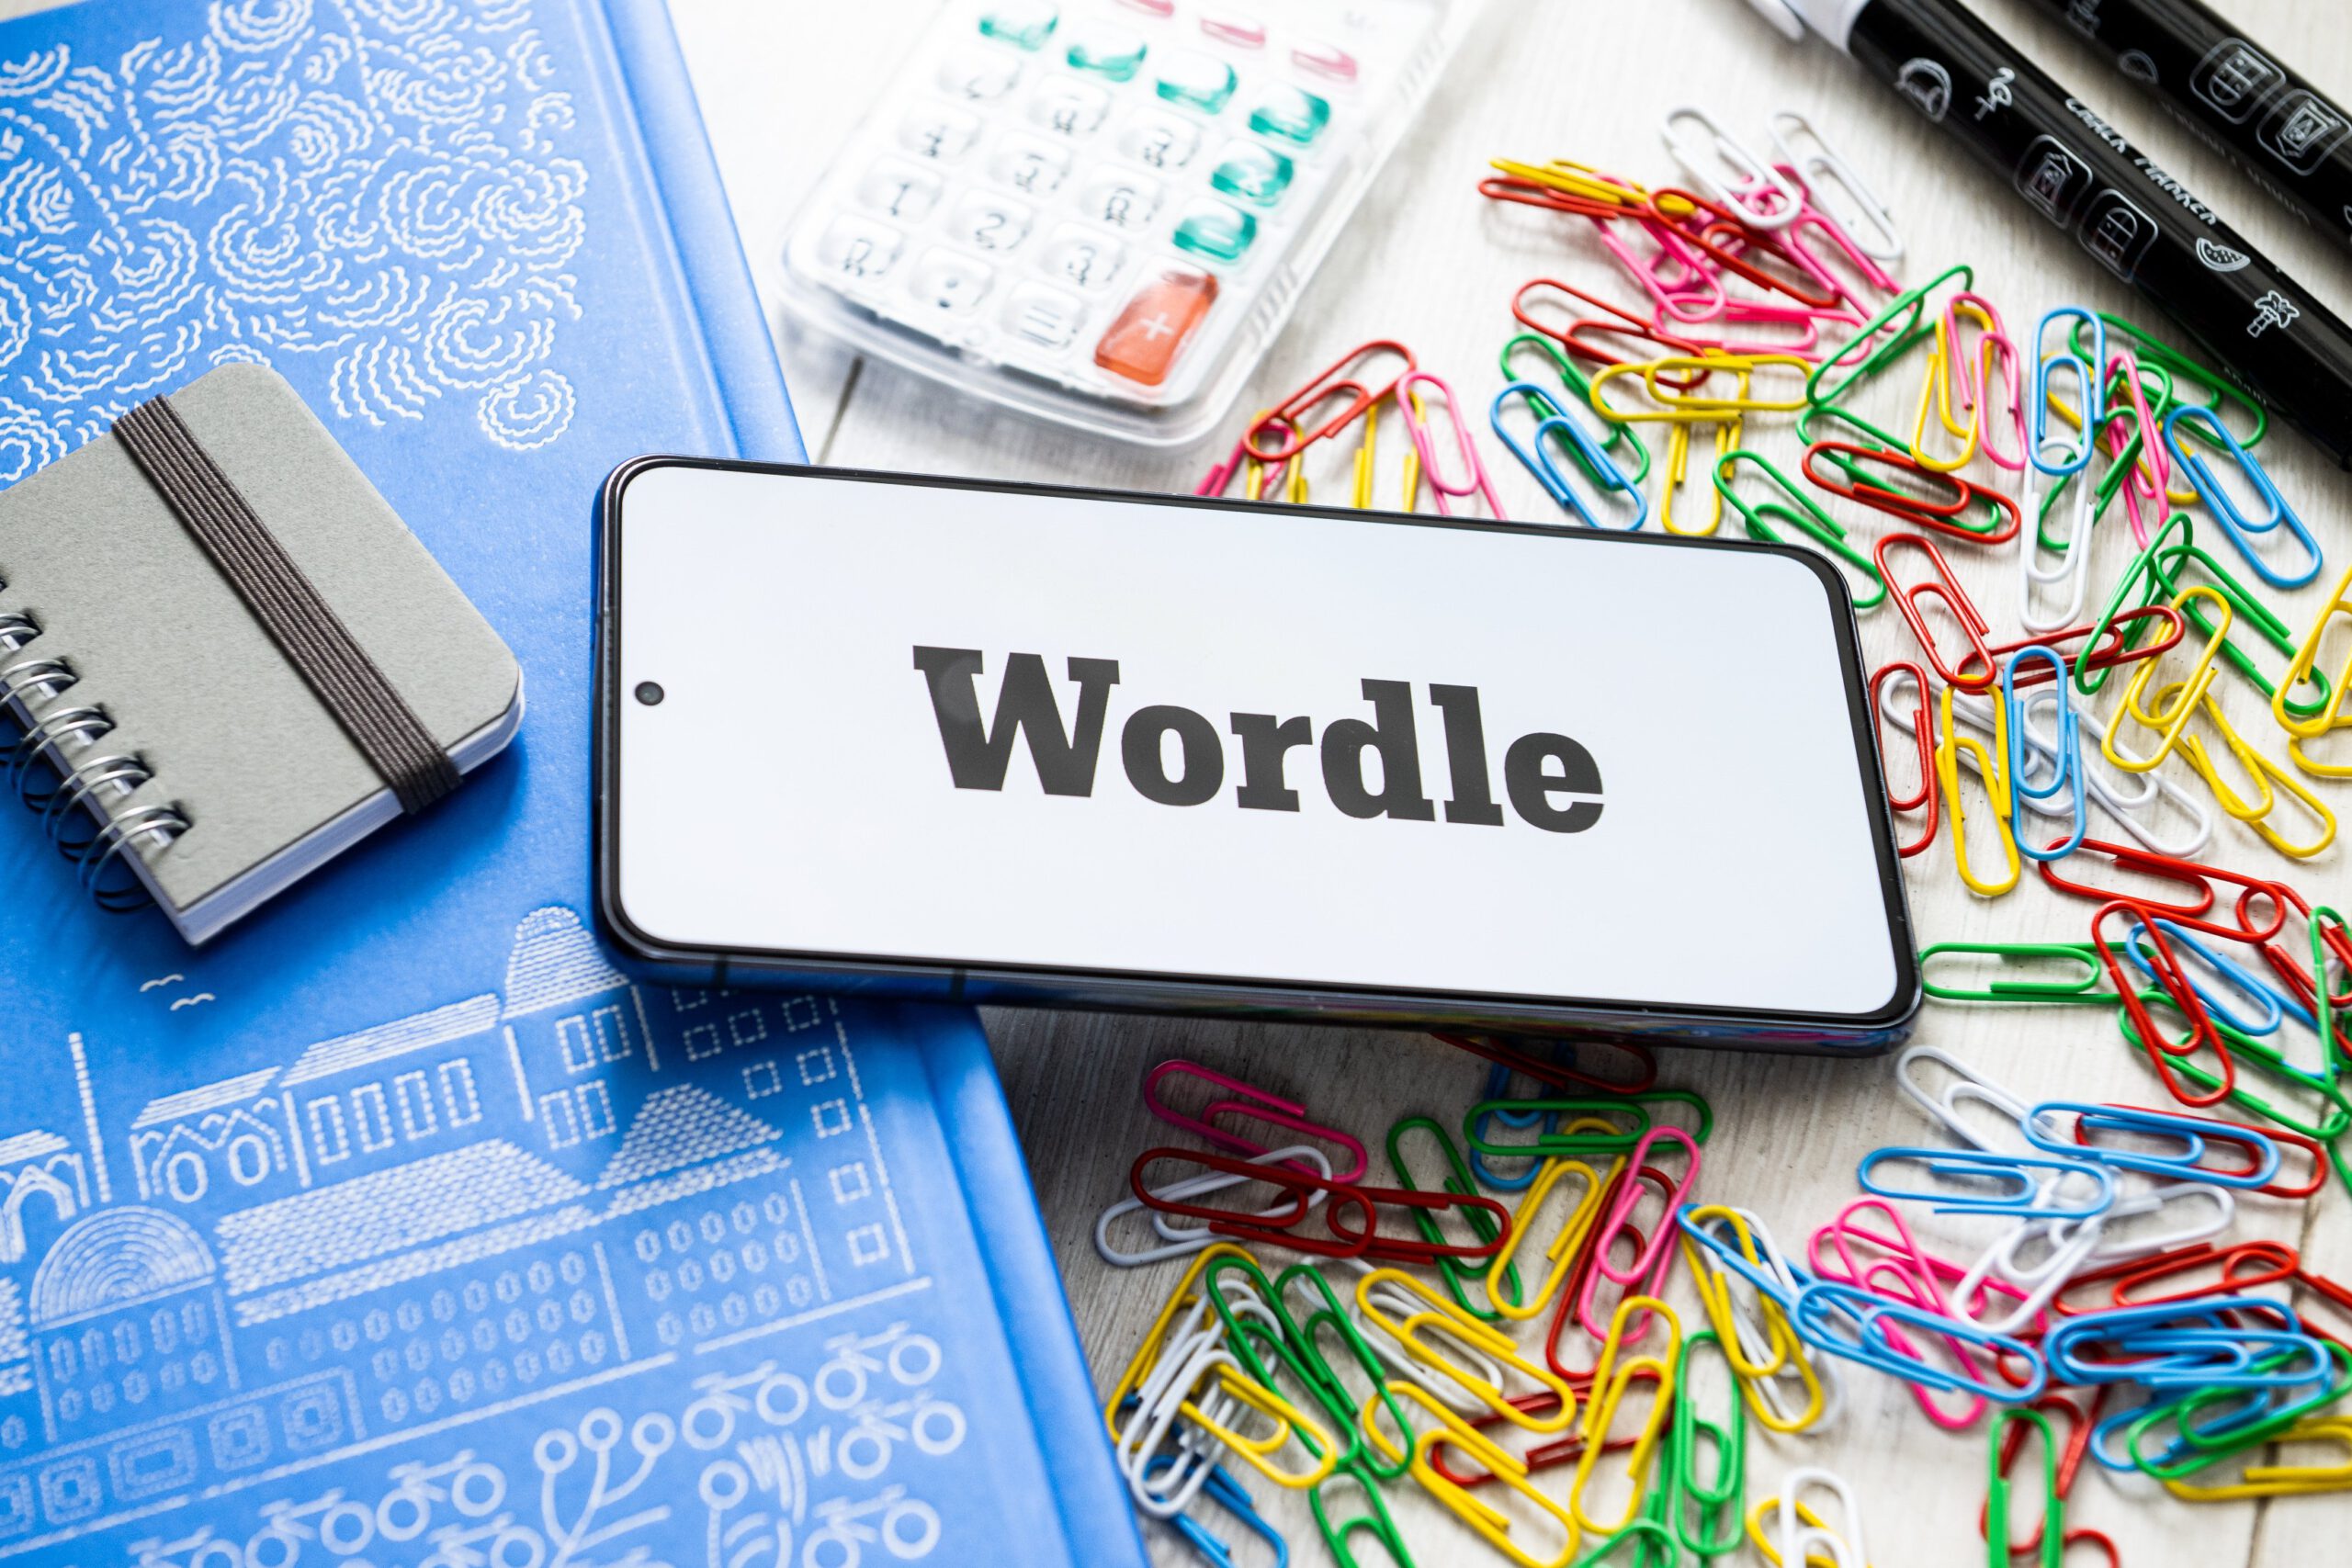 A Wordle logo seen displayed on a smartphone against a cluttered desk.